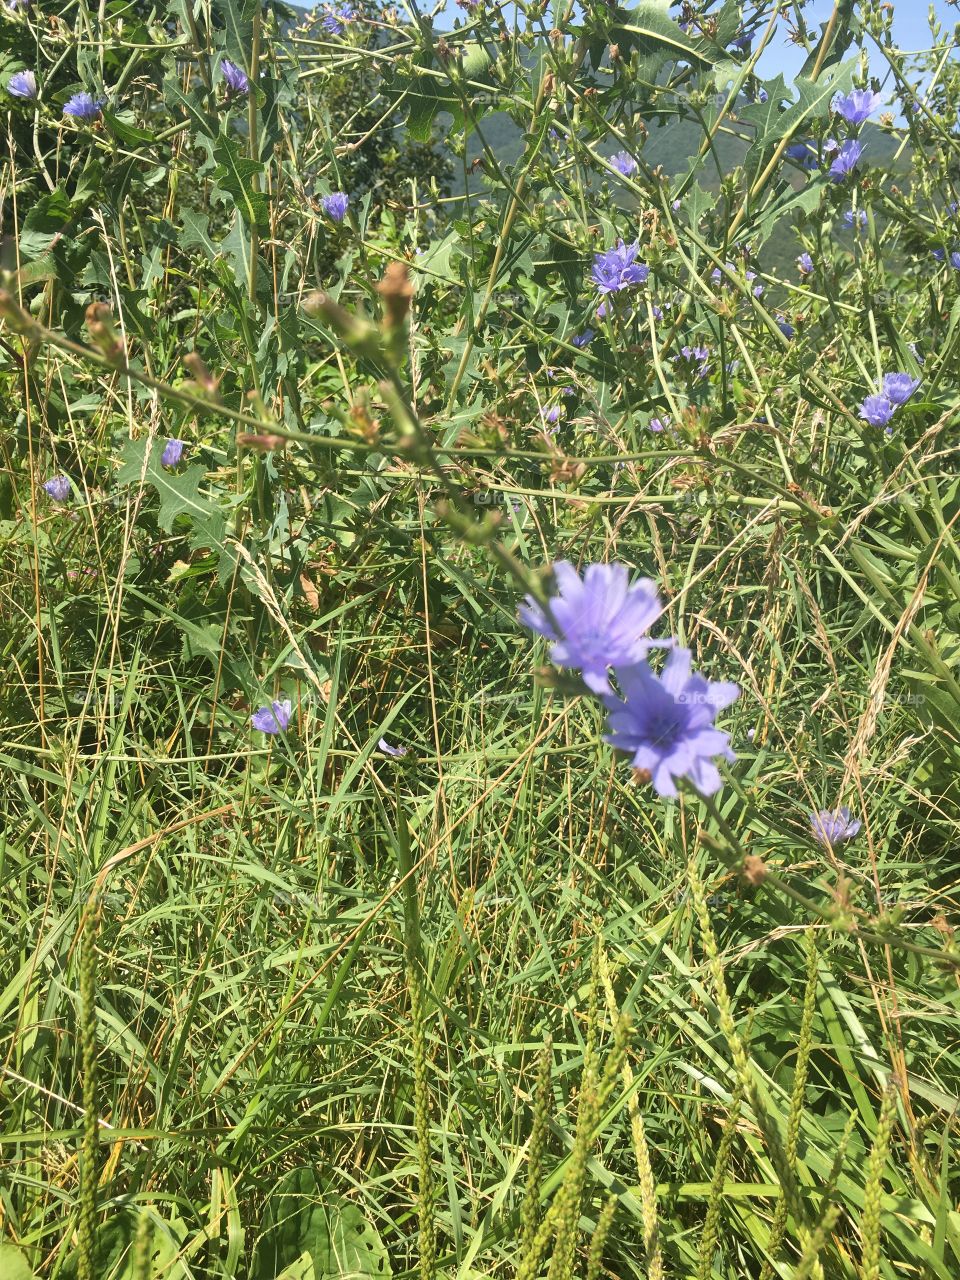 The cornflowers grow all over the mountains in scenic West Virginia